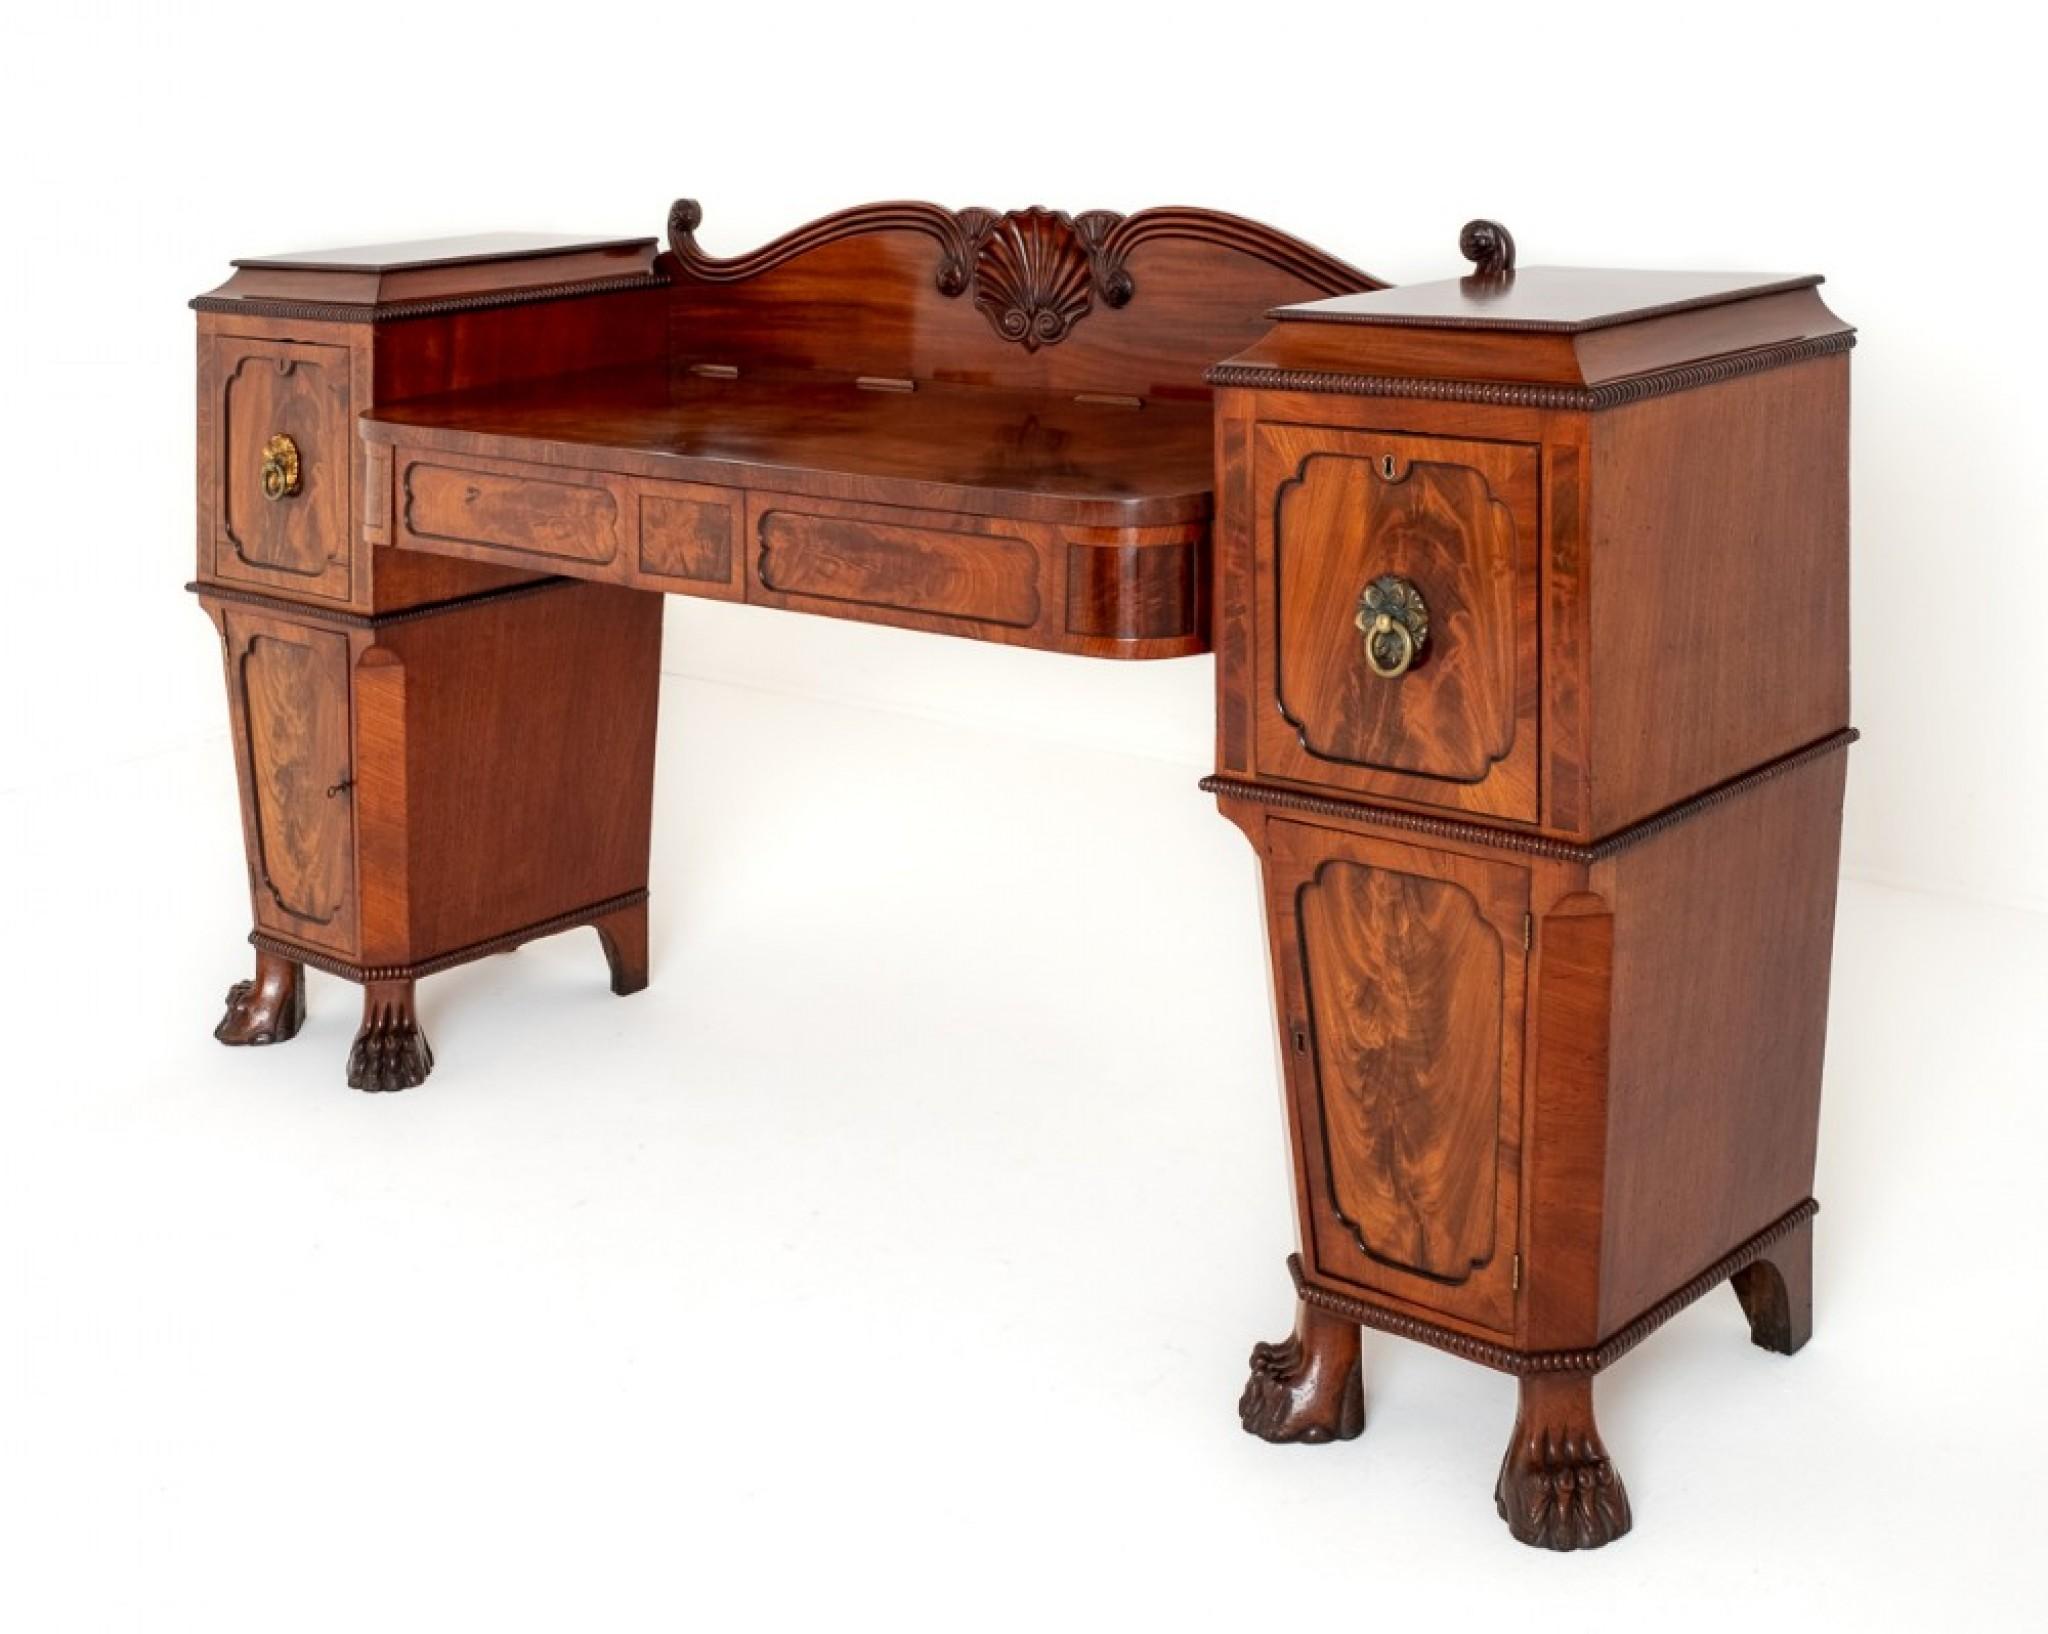 Stunning Mahogany Regency Sideboard (attributed to George Bullock)
Period Regency
This Wonderful Sideboard is Raised upon Carved Lions Paw Feet.
Having an Arrangement of Drawers and Cupboards.
The Whole of the Sideboard Boasting Wonderful Flame